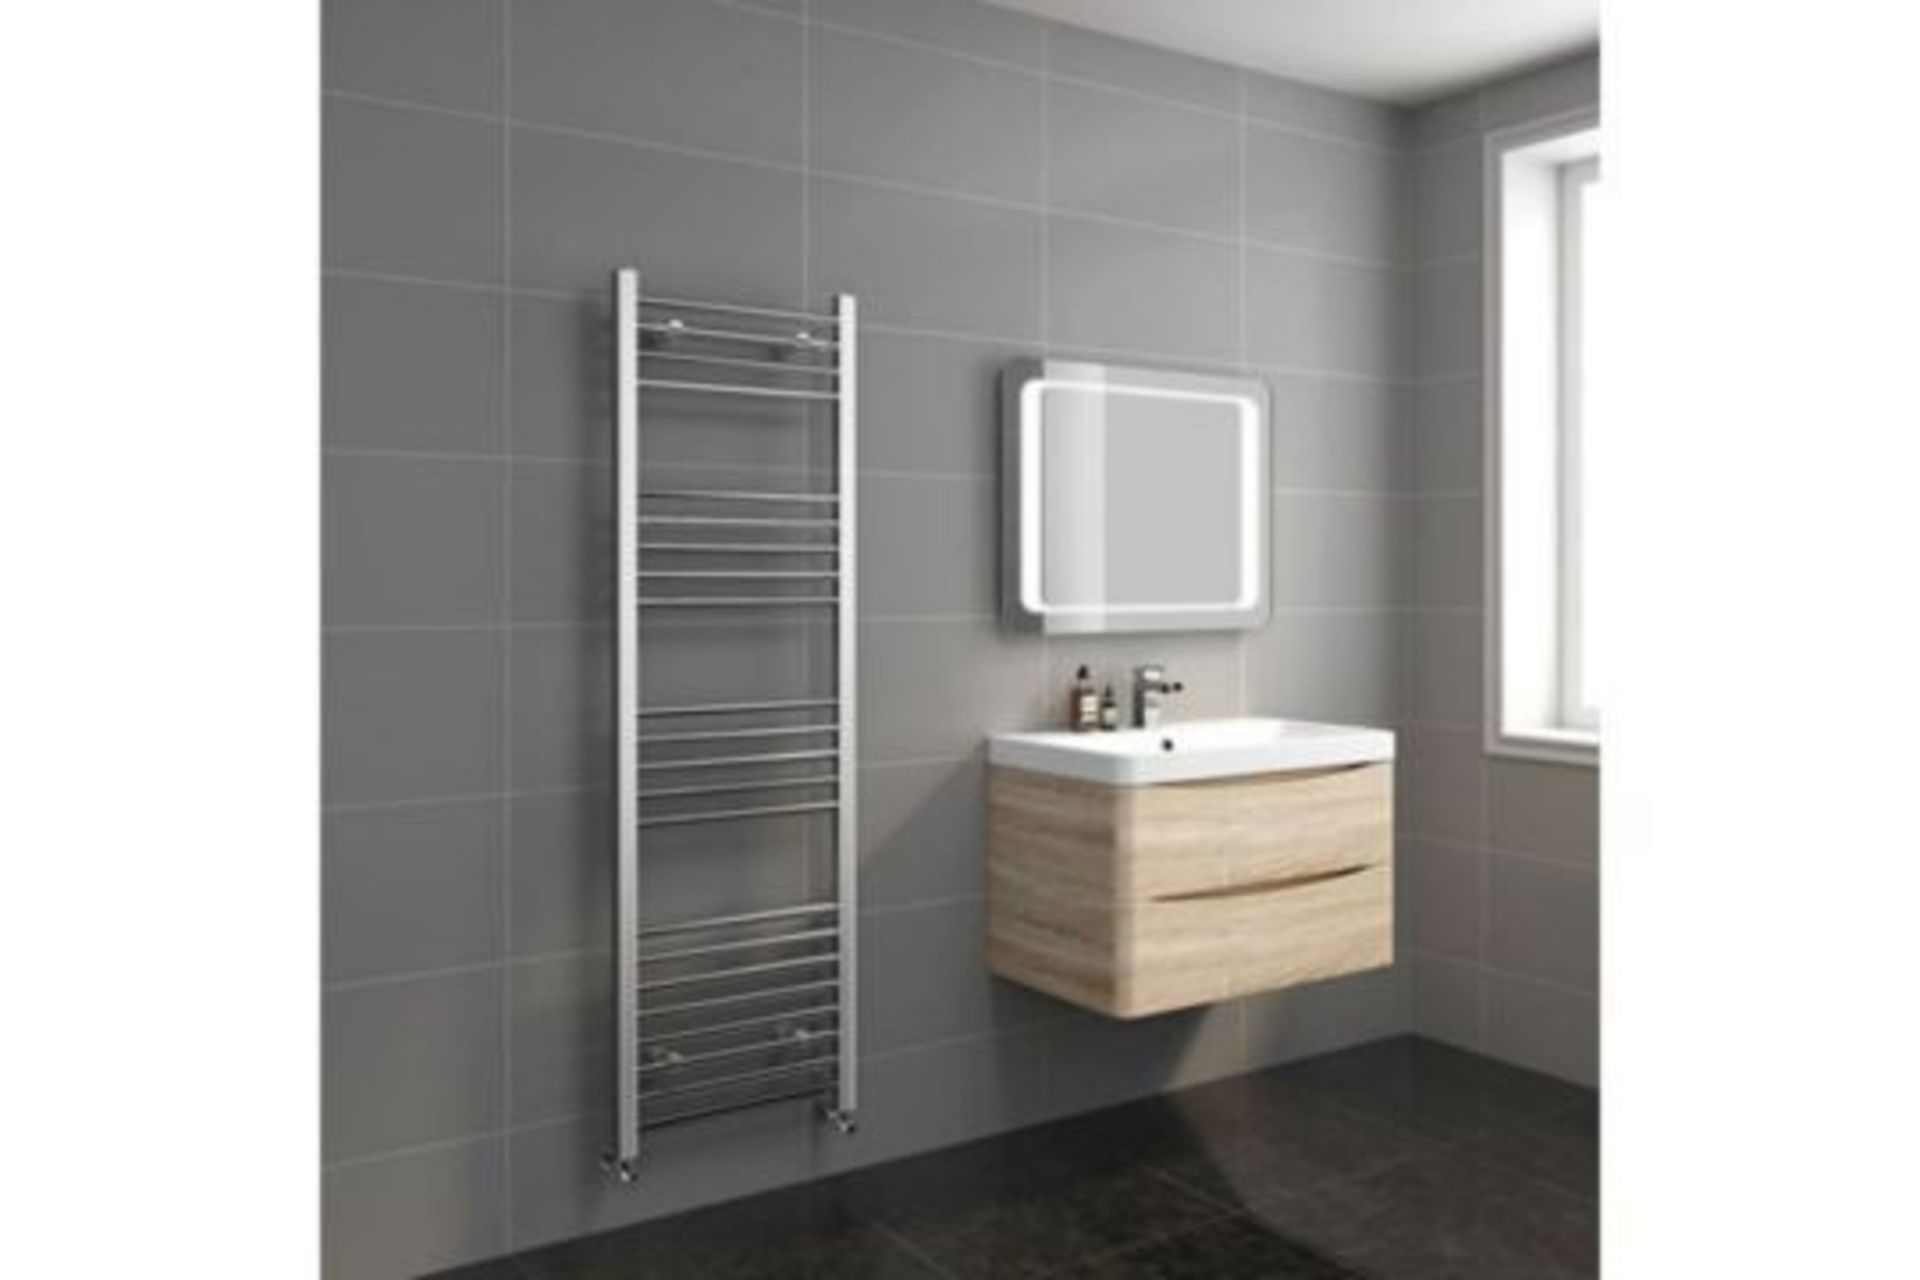 New 1600x500mm - 20mm Tubes - Chrome Flat Rail Ladder Towel Radiator.Ns1600500. Made From Chro... - Image 2 of 2